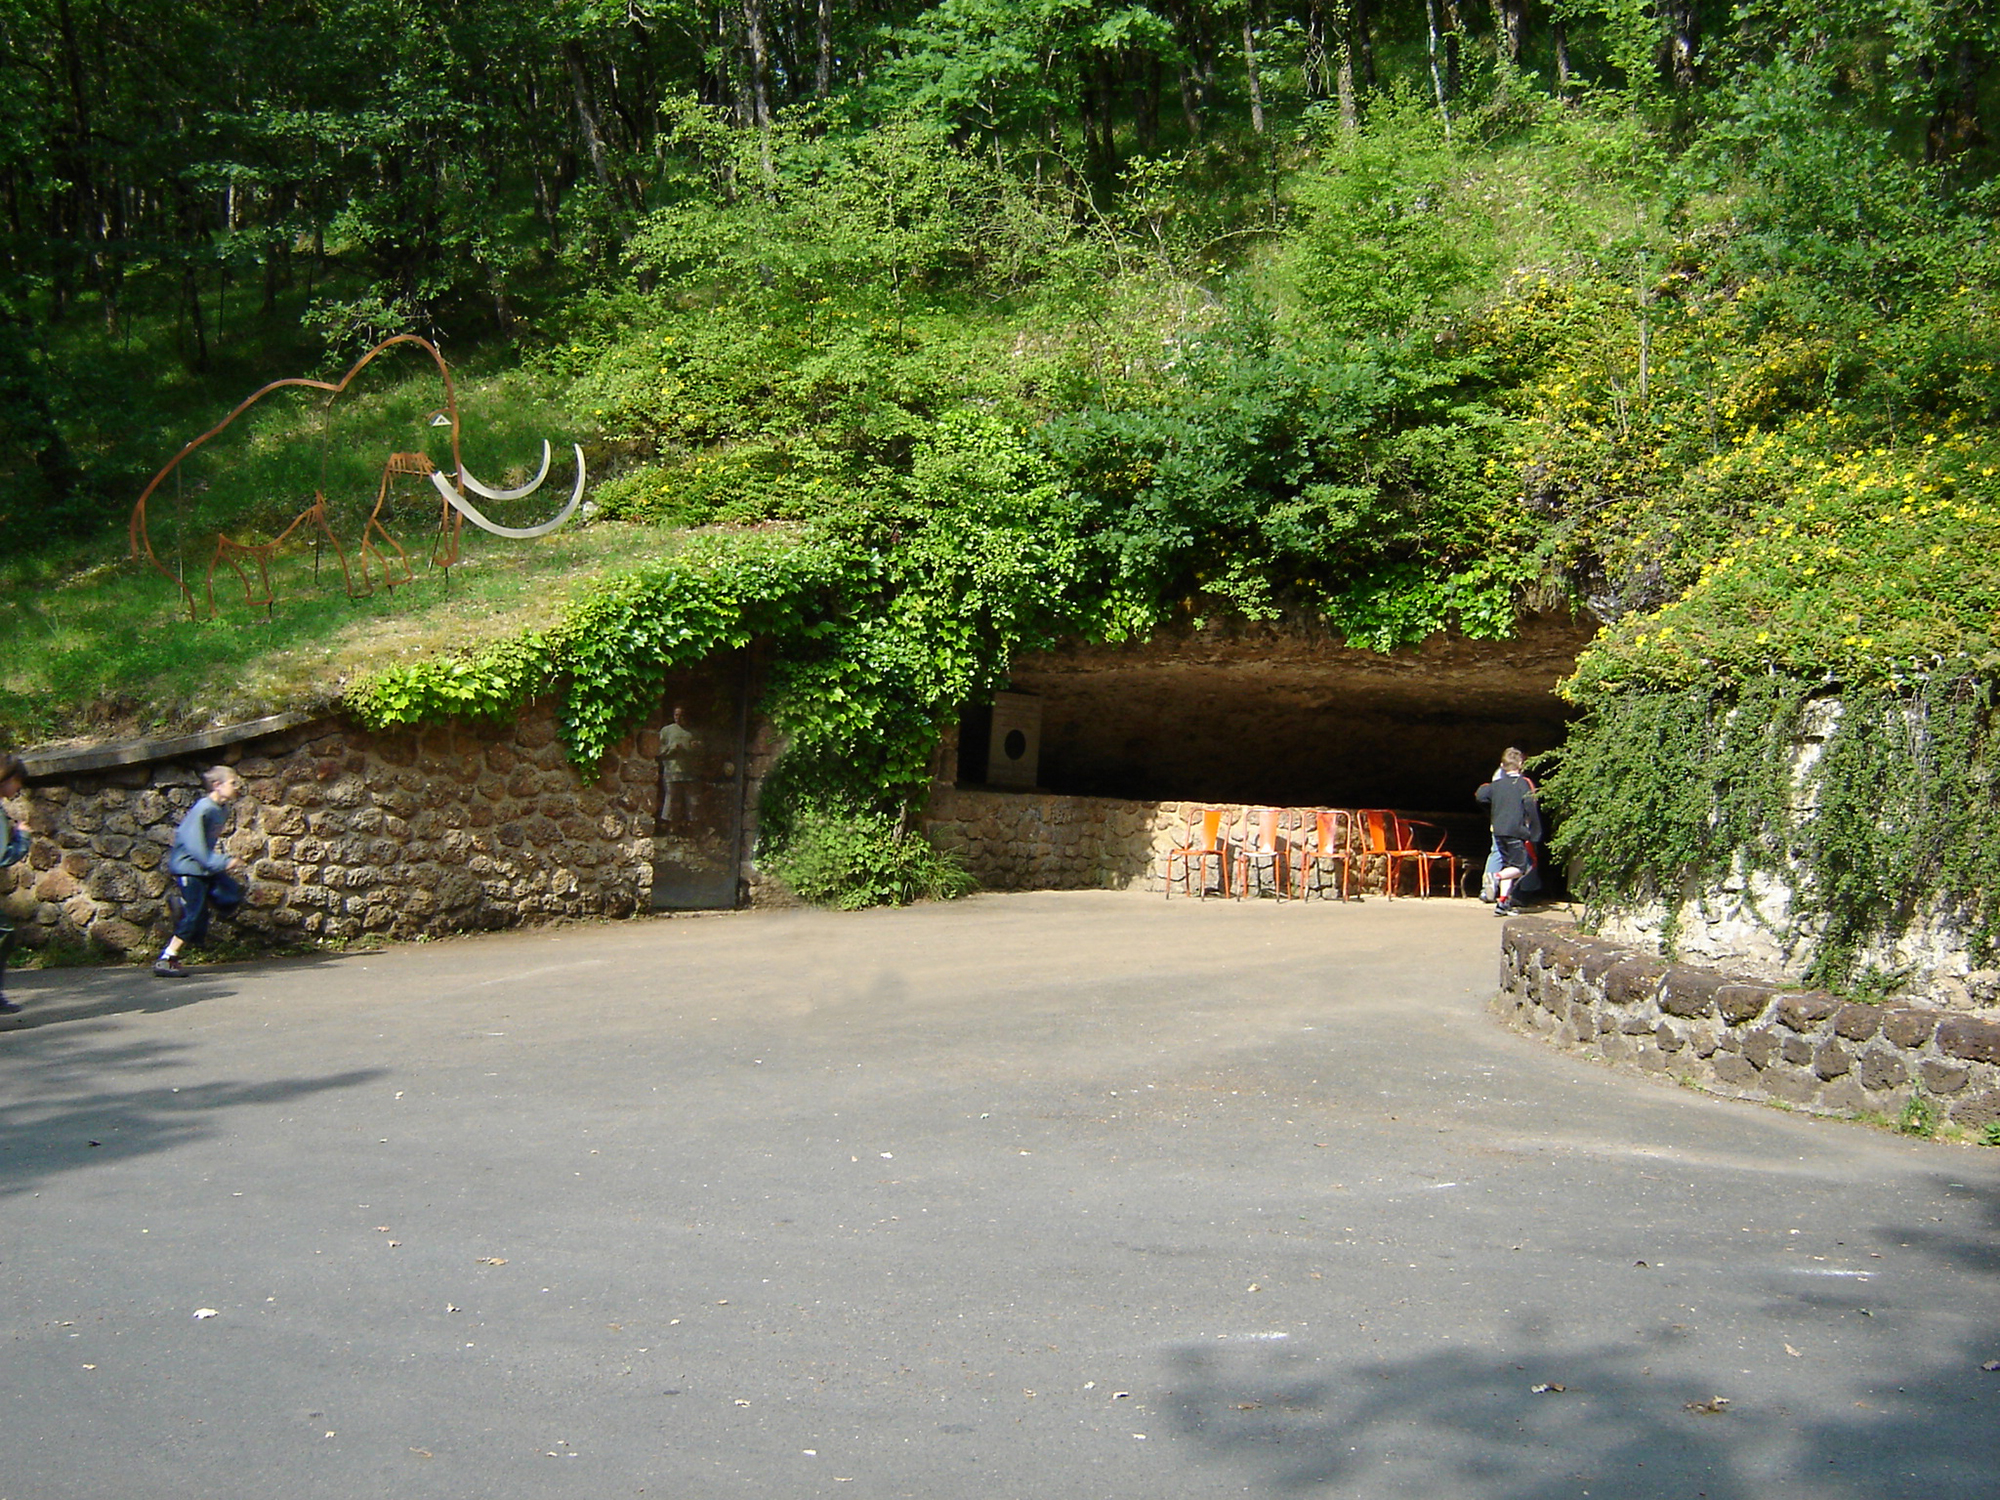 Visiting the Rouffignac Cave